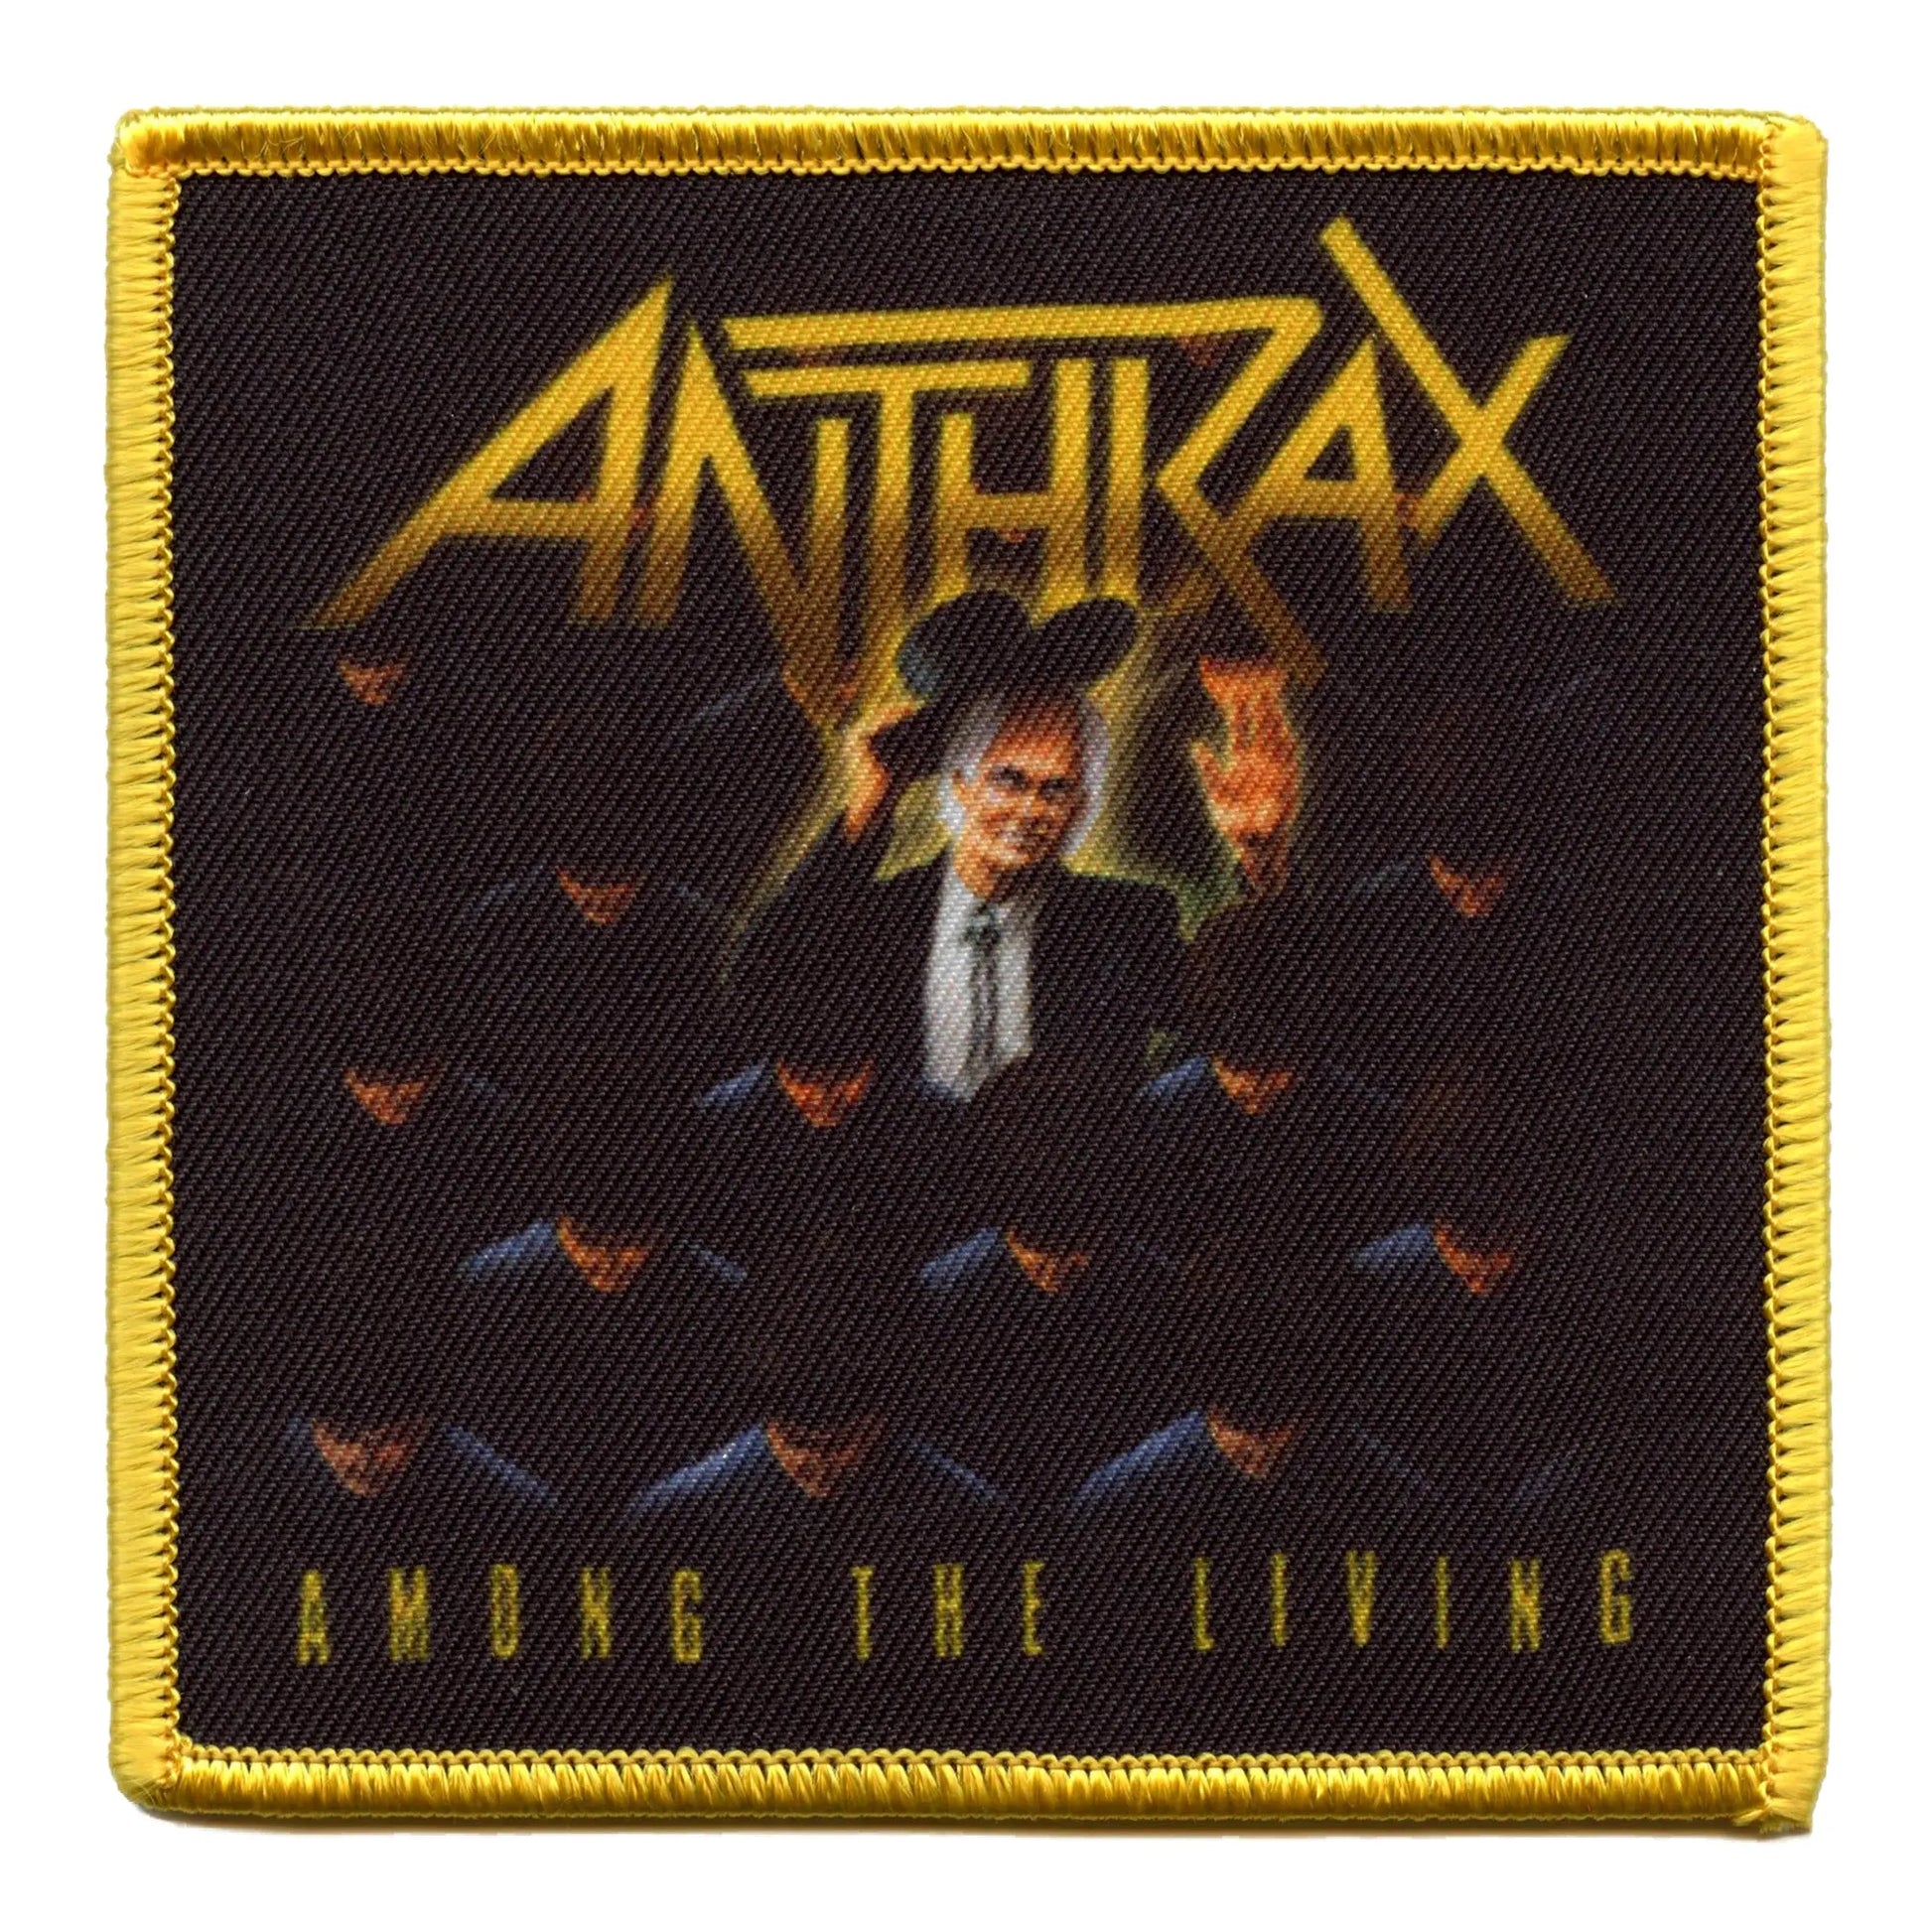 Anthrax Among The Living Patch 1987 Album Cover Embroidered Iron On 